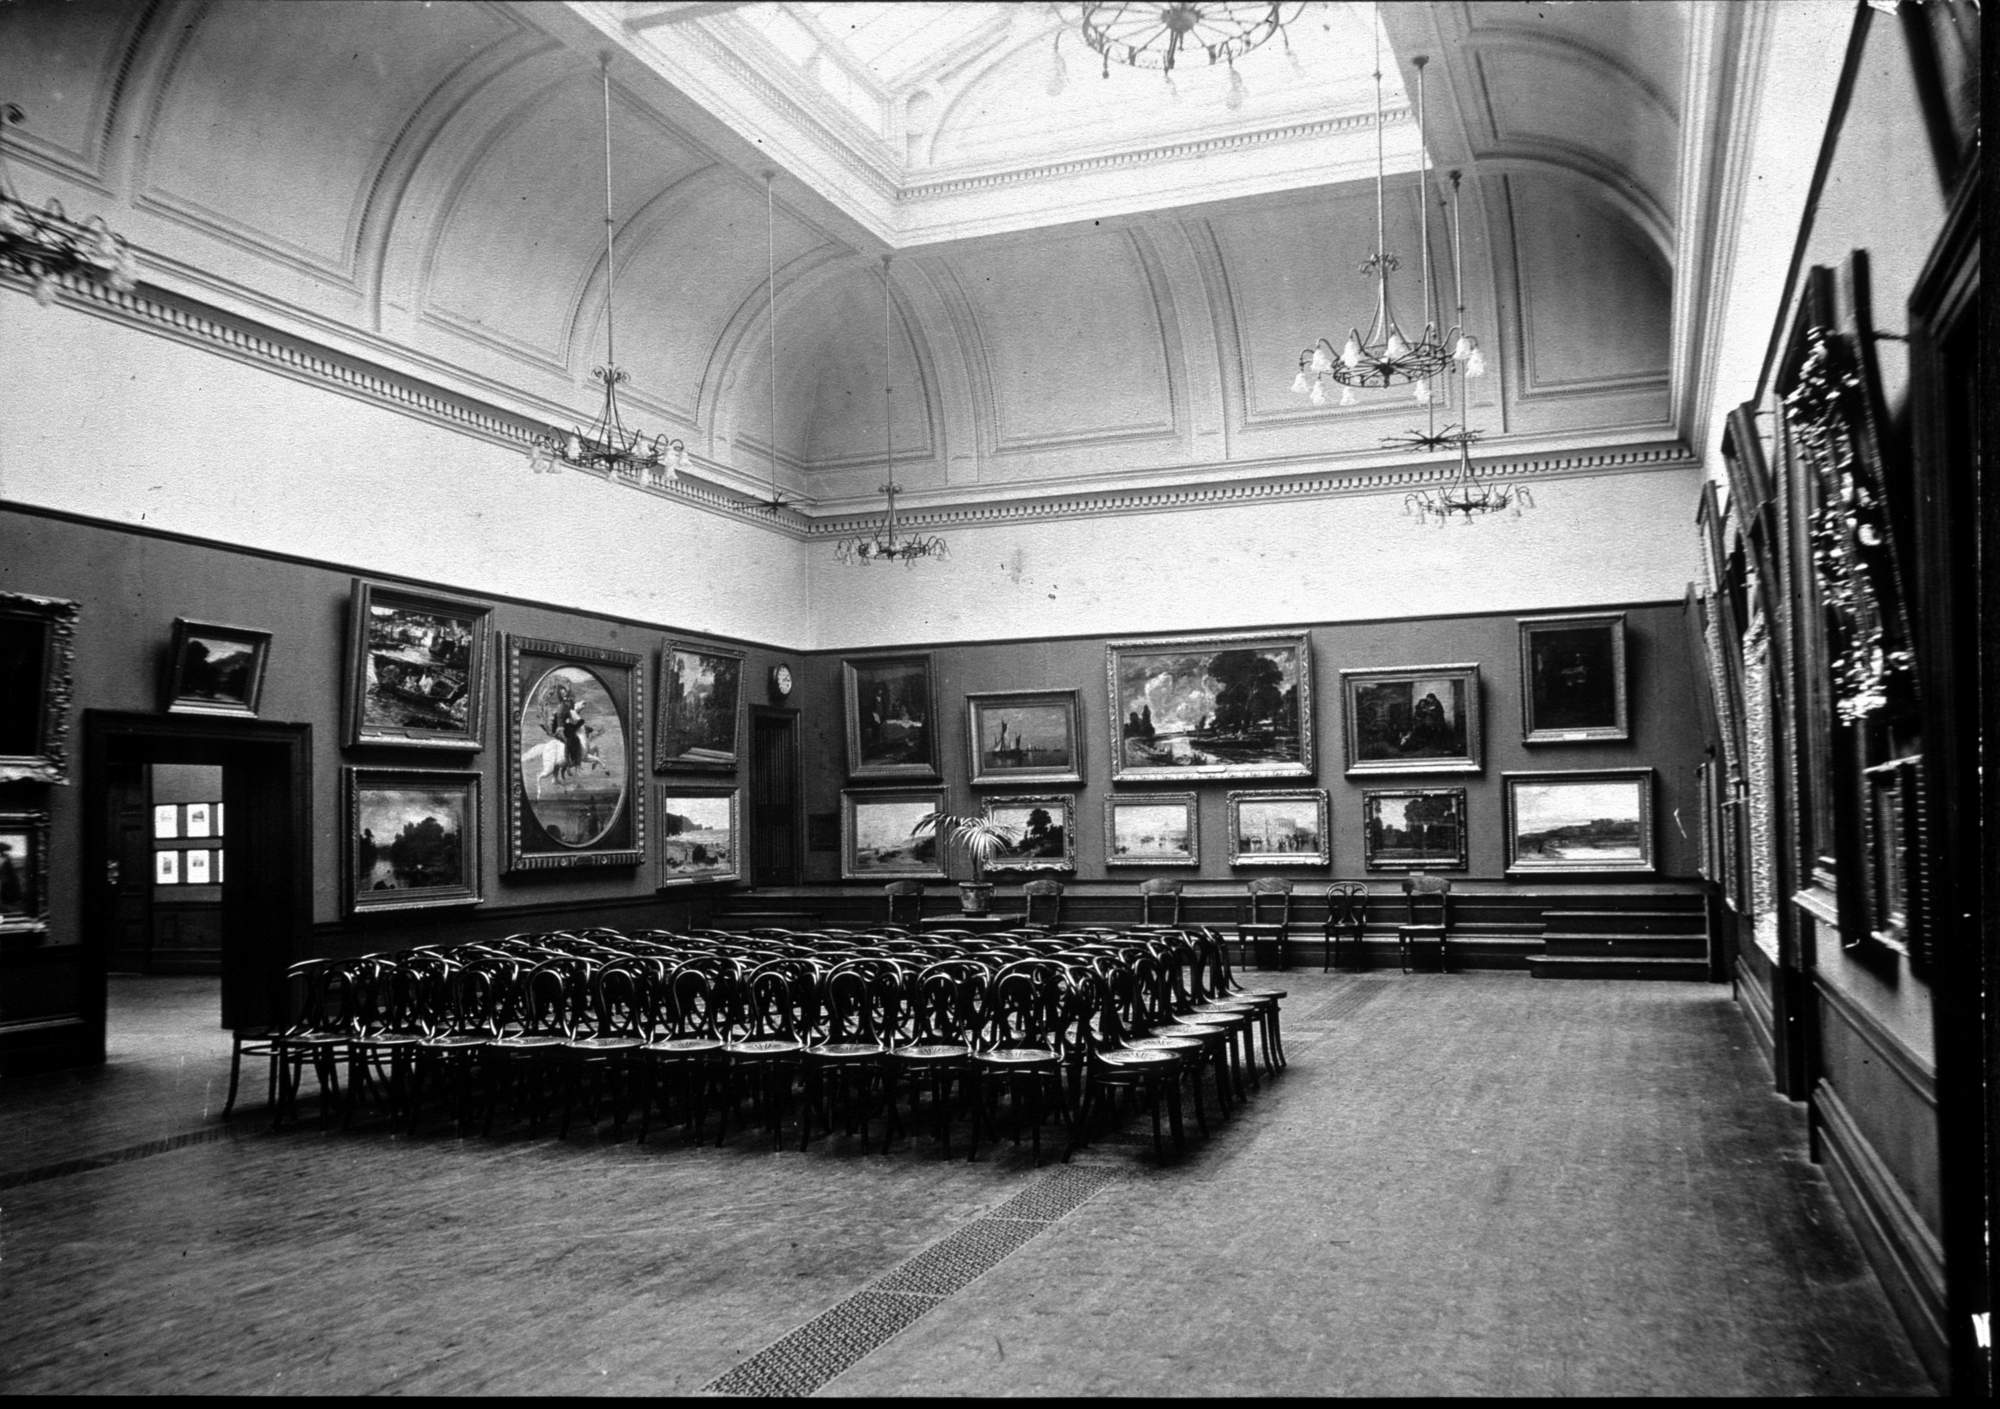 The Large Art Gallery in 1926. Leighton’s large oil painting ‘Perseus on Pegasus’ can be seen on the wall.